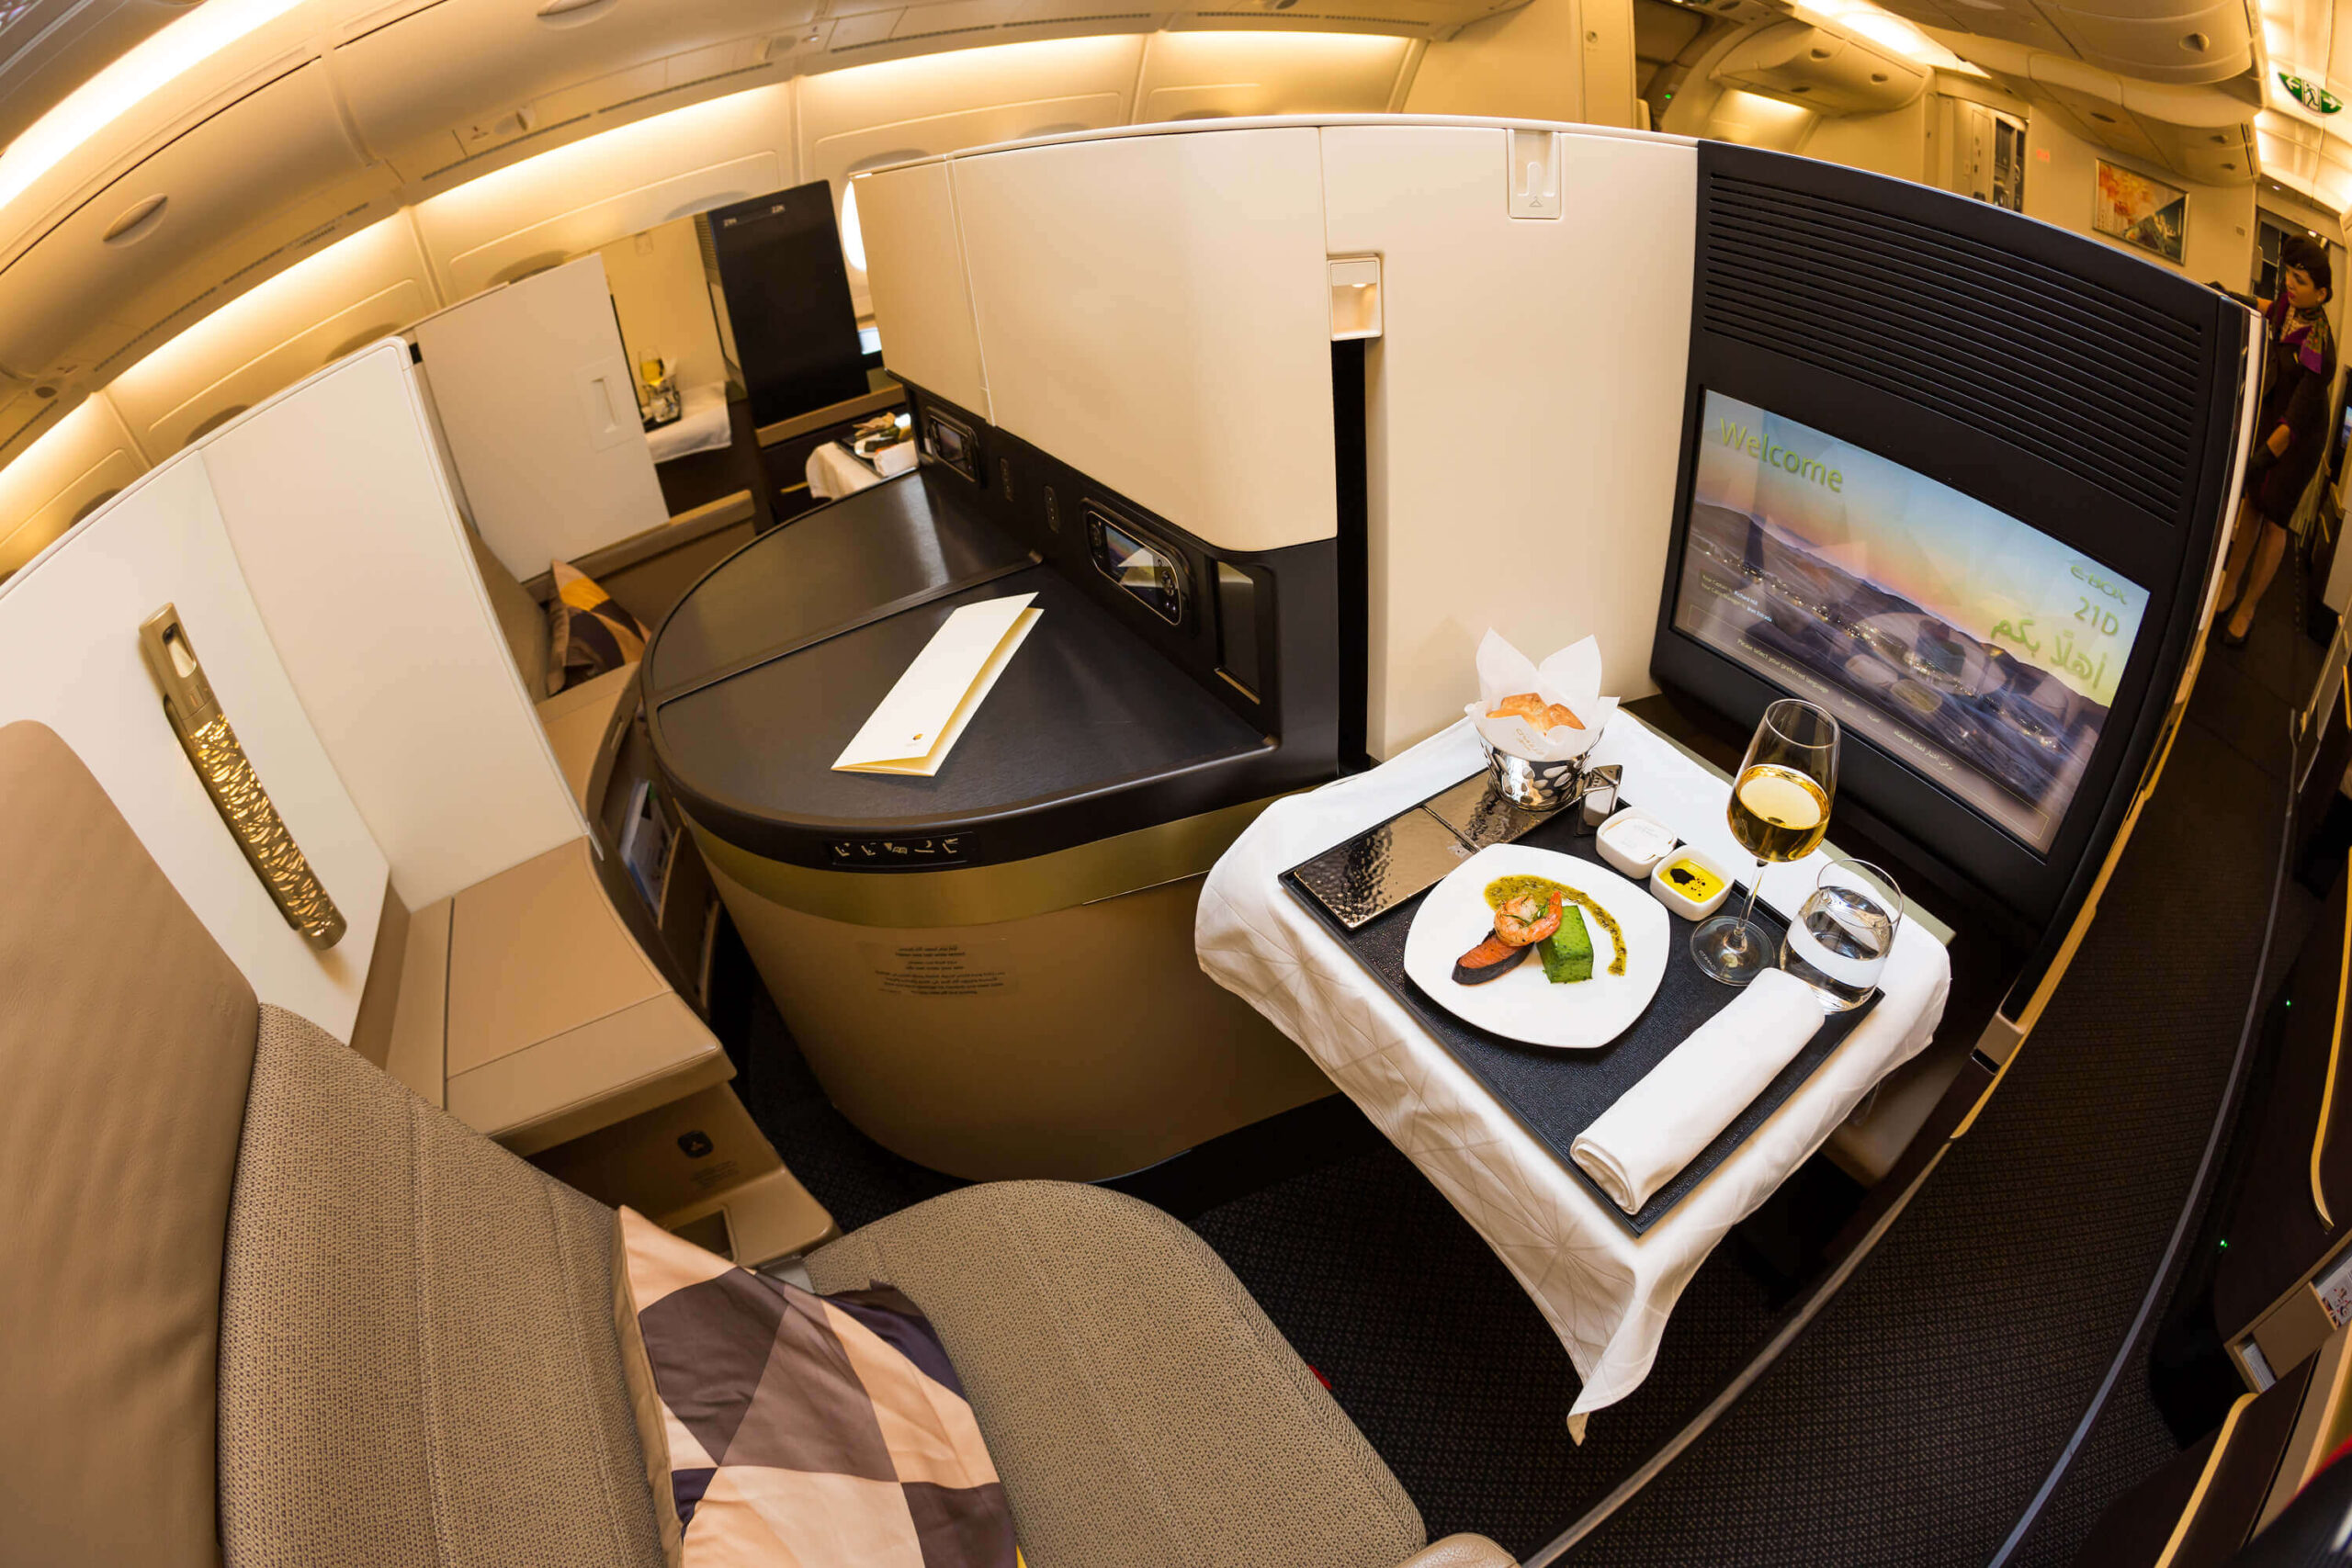 10 of the most luxurious Business Class cabins in the world - AeroTime